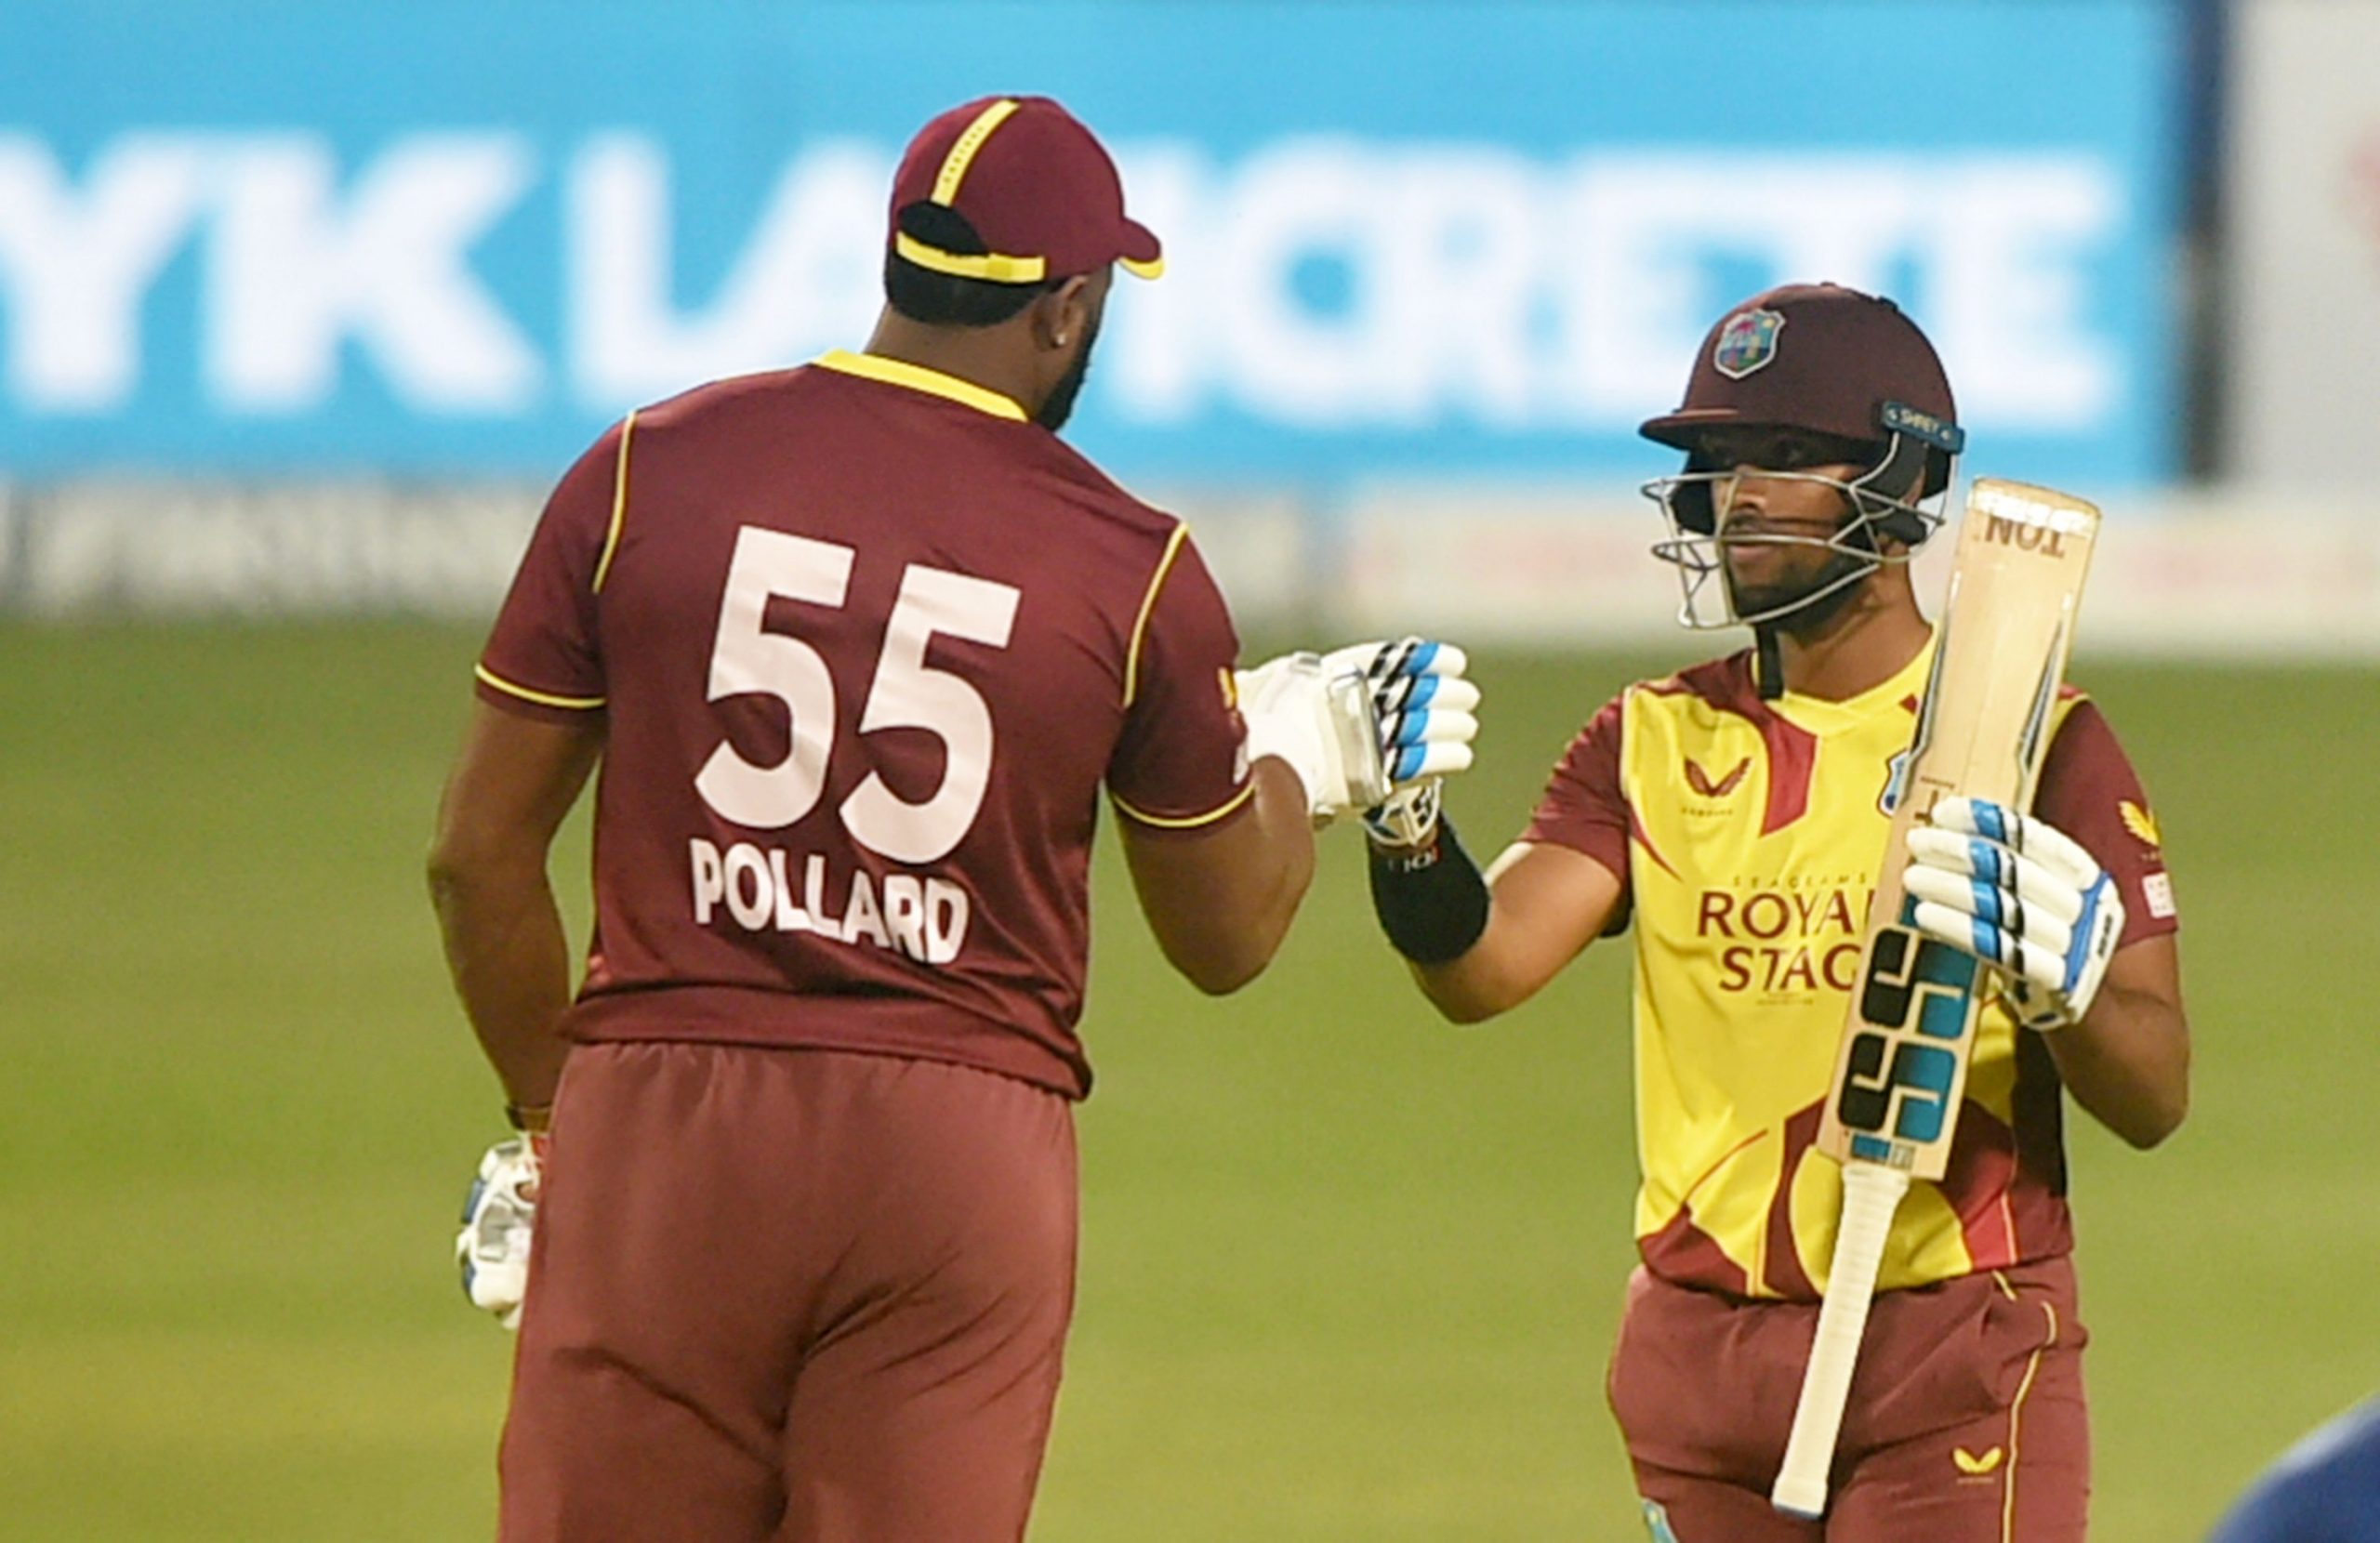 West Indies tour of Netherlands postponed to May ’22, boards confirm